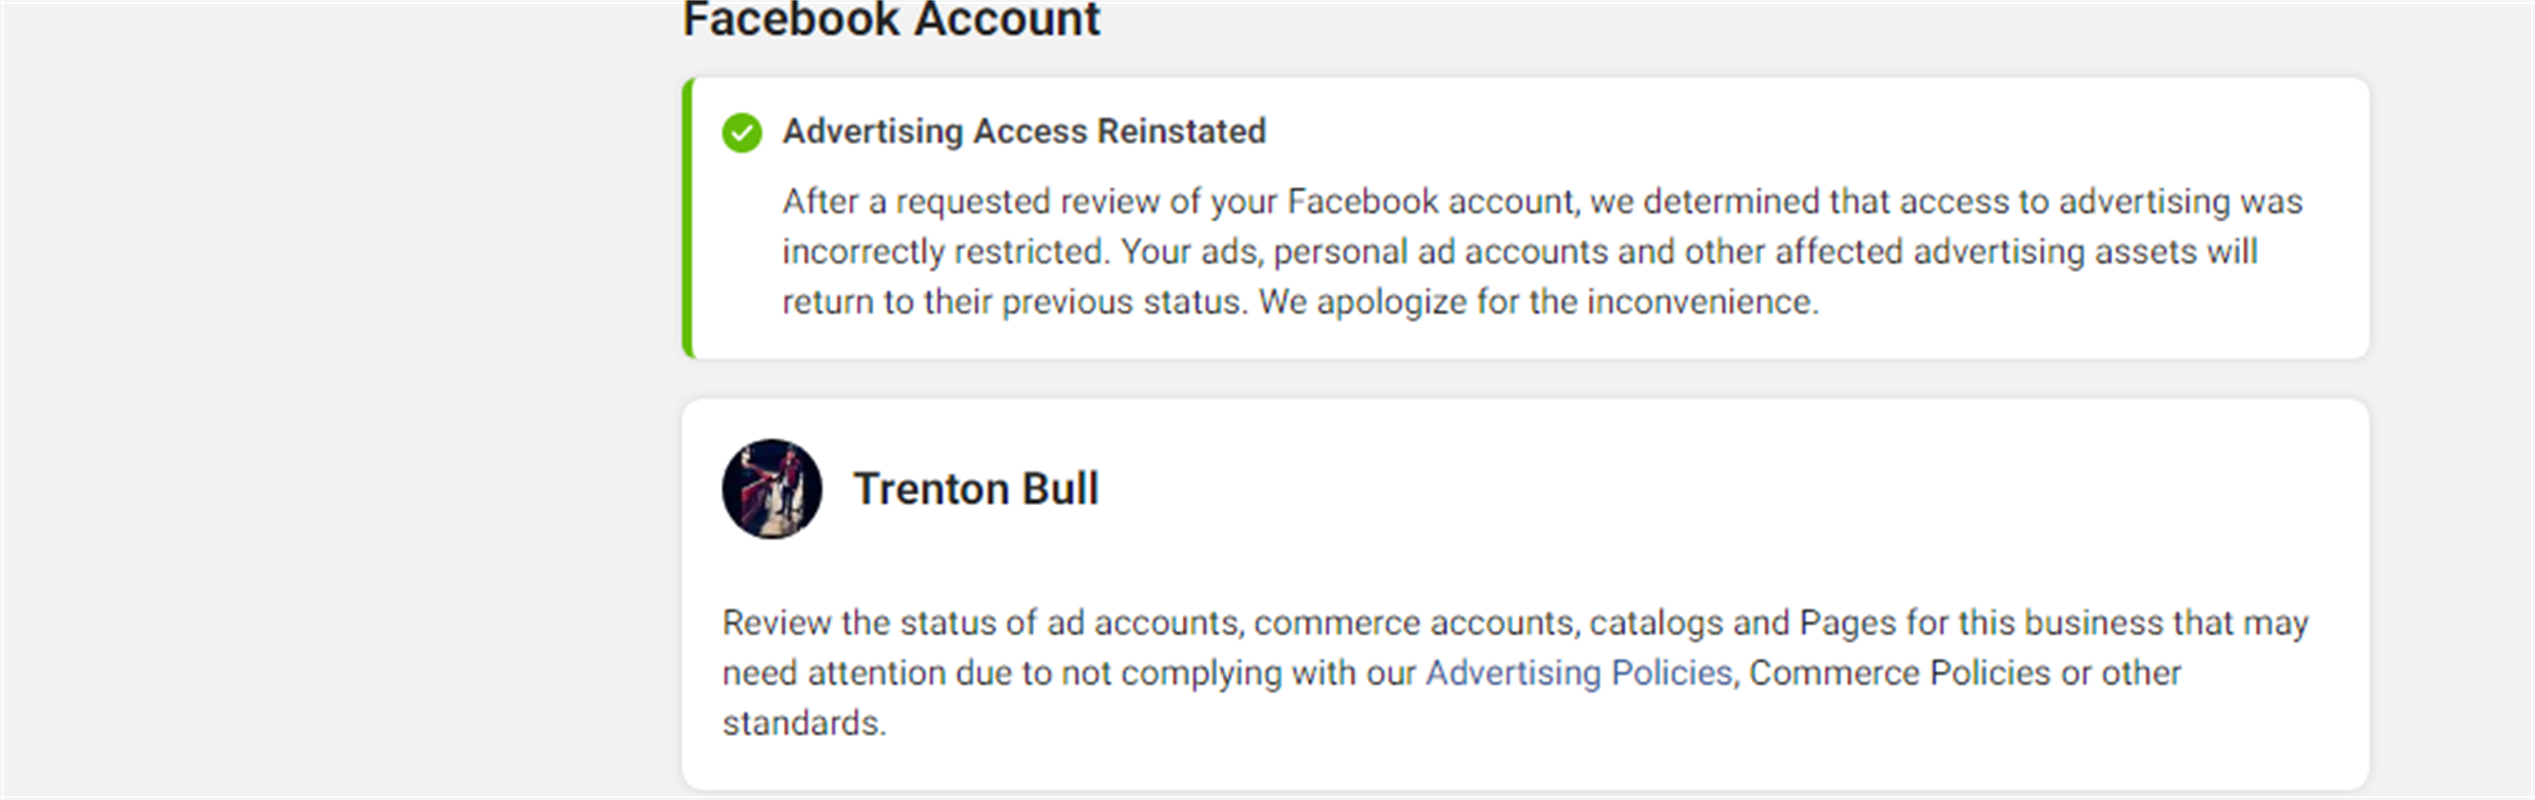 ThaiLand Facebook Ads Account / Already resisted link 902 / 2FA / Full mail